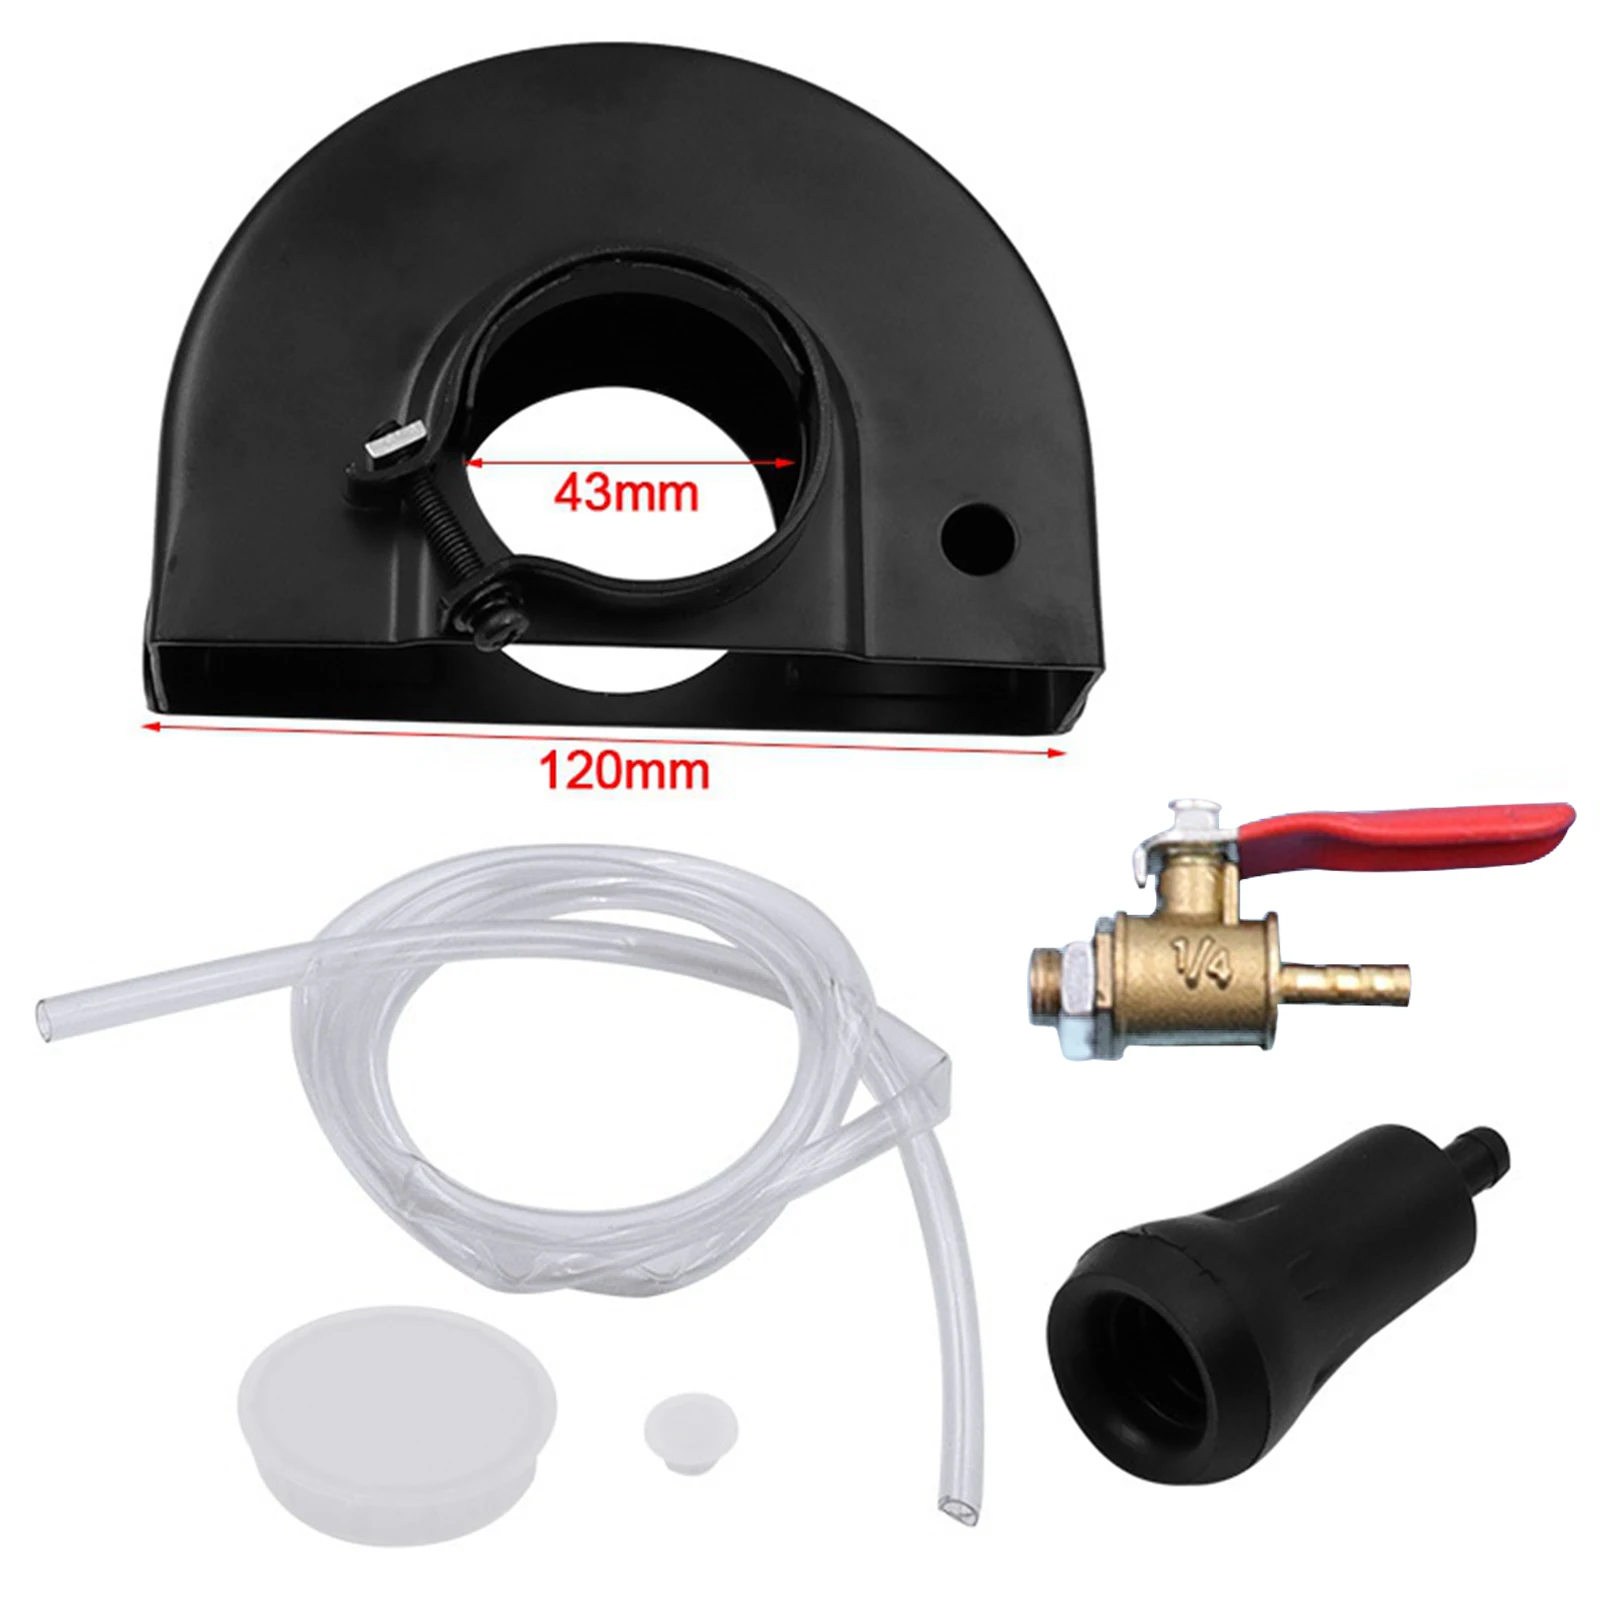 

2021New Dust Collecting Guard Kit Universal Surface Cutting Dust Shroud for Angle Grinder Dust Collector Attachment Cover Drops